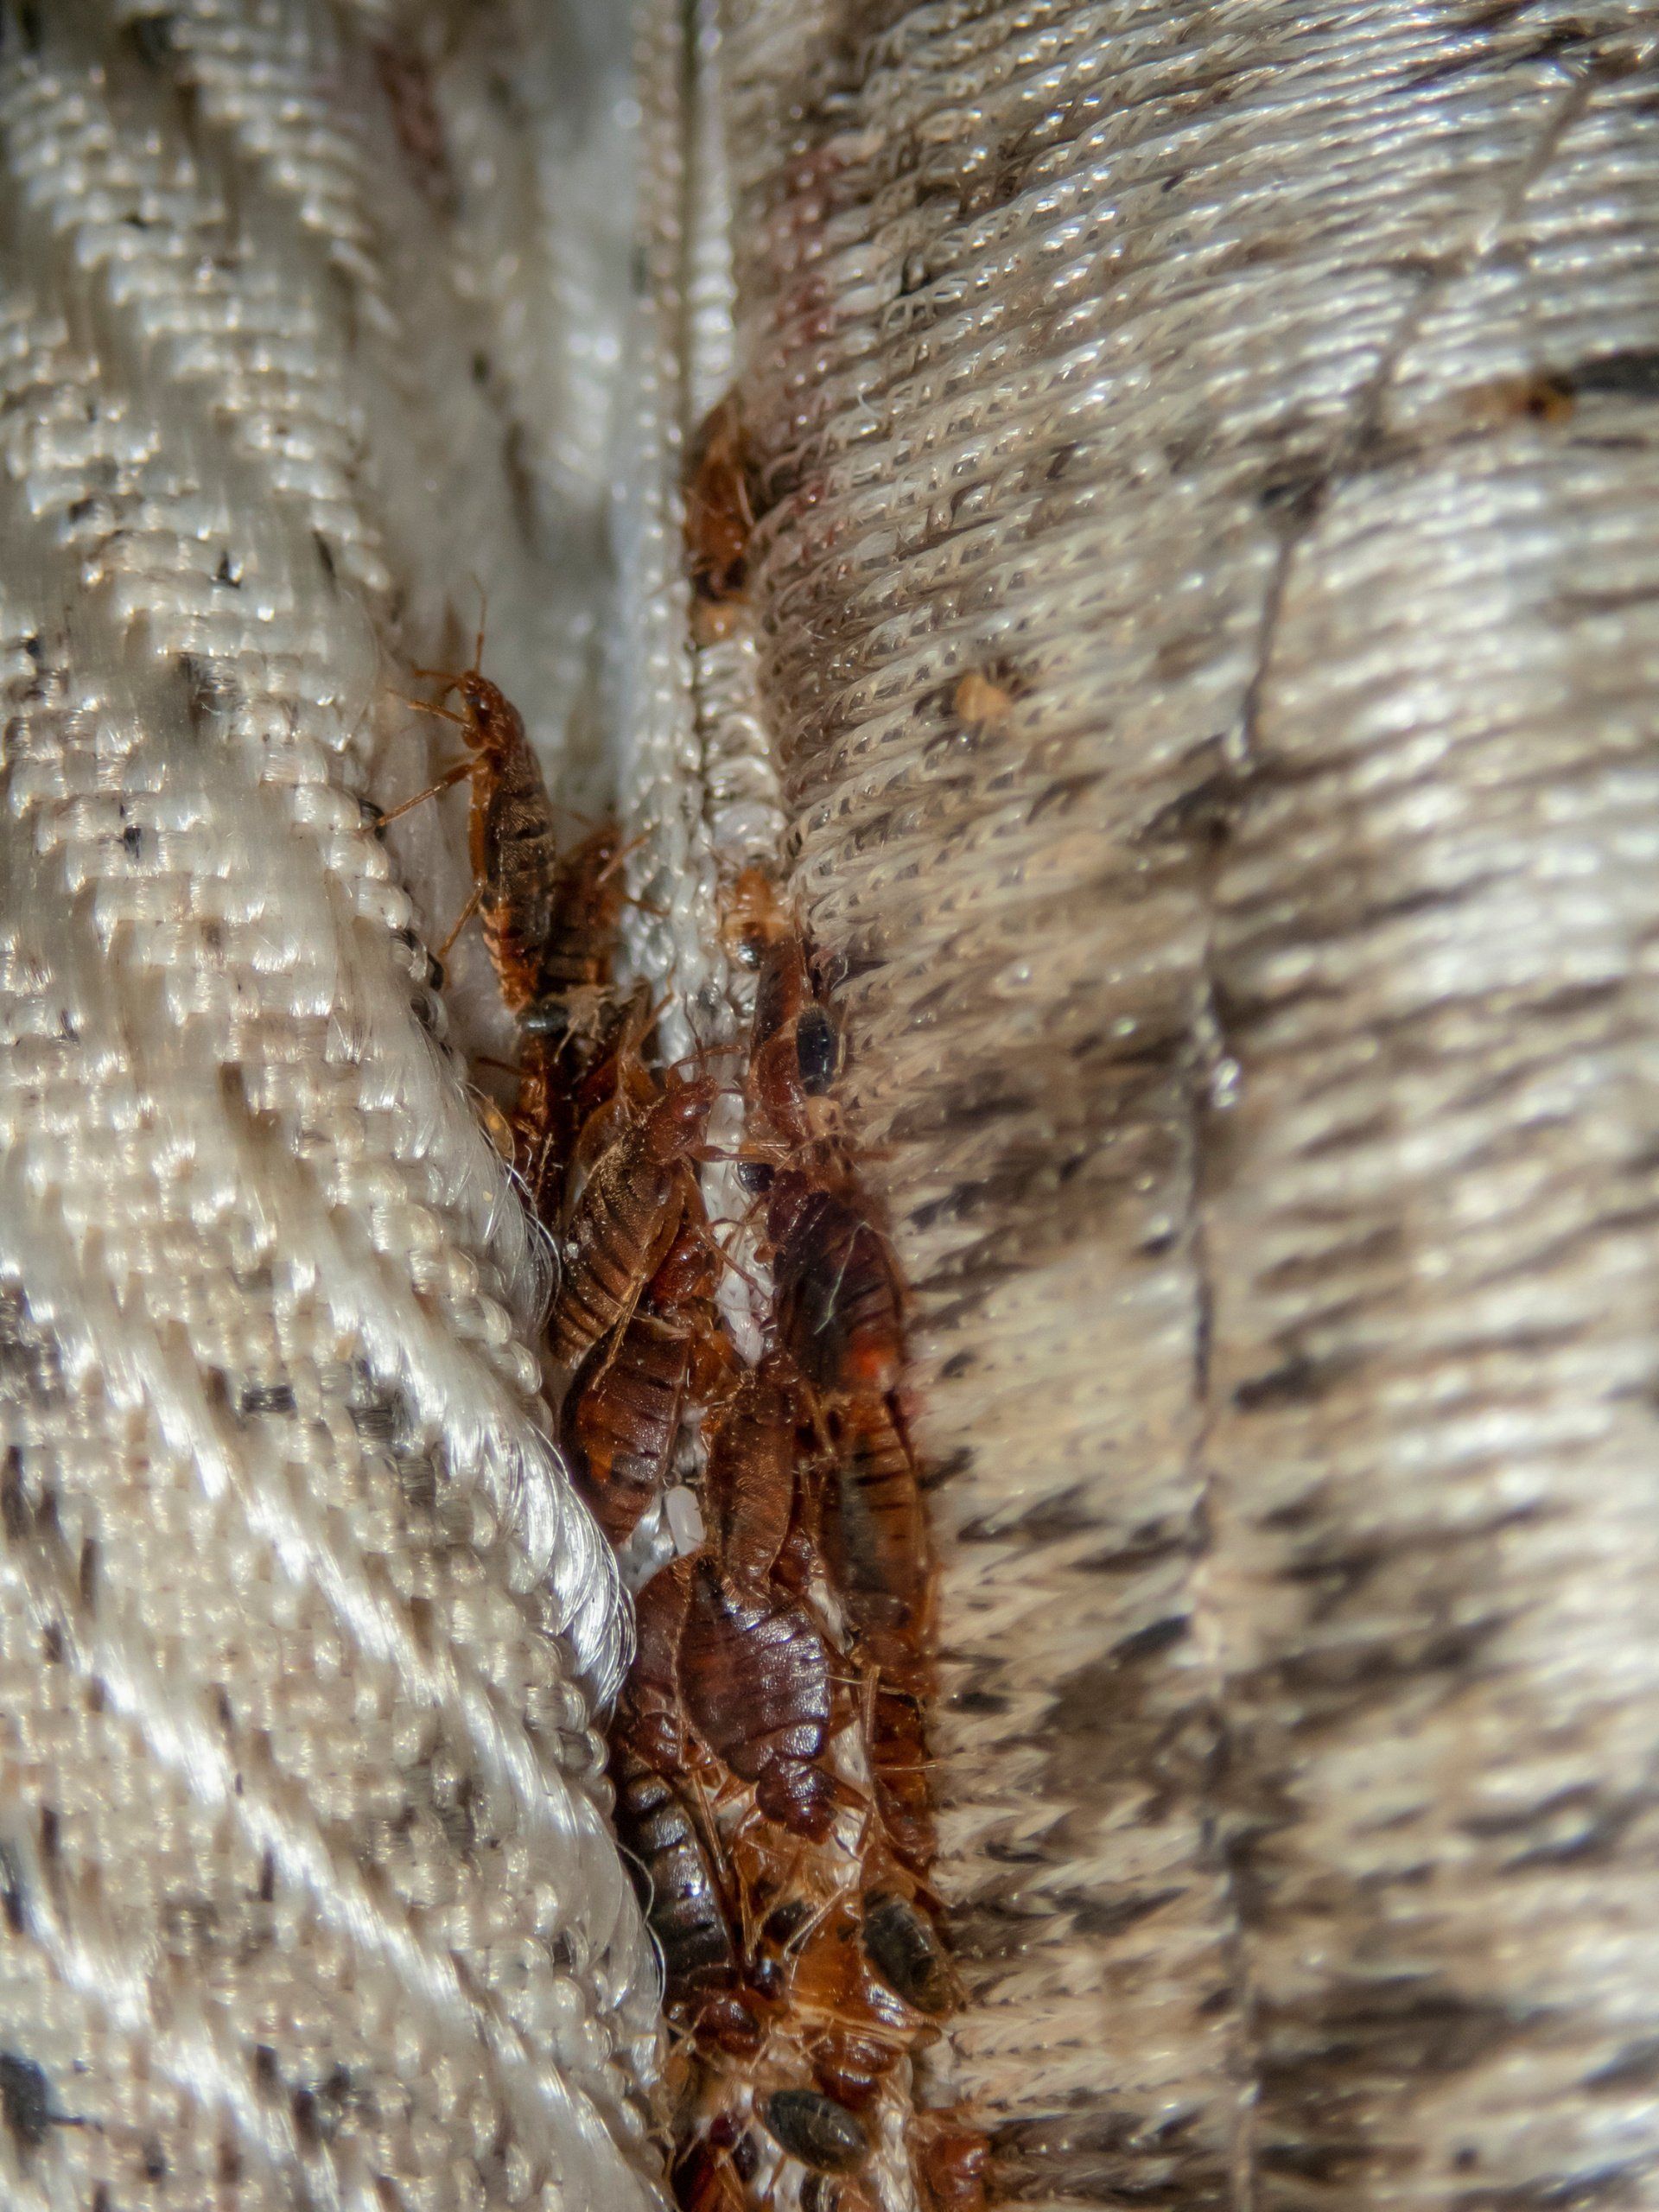 Group of bed bugs gathered together in the seam of a cream and grey mattress